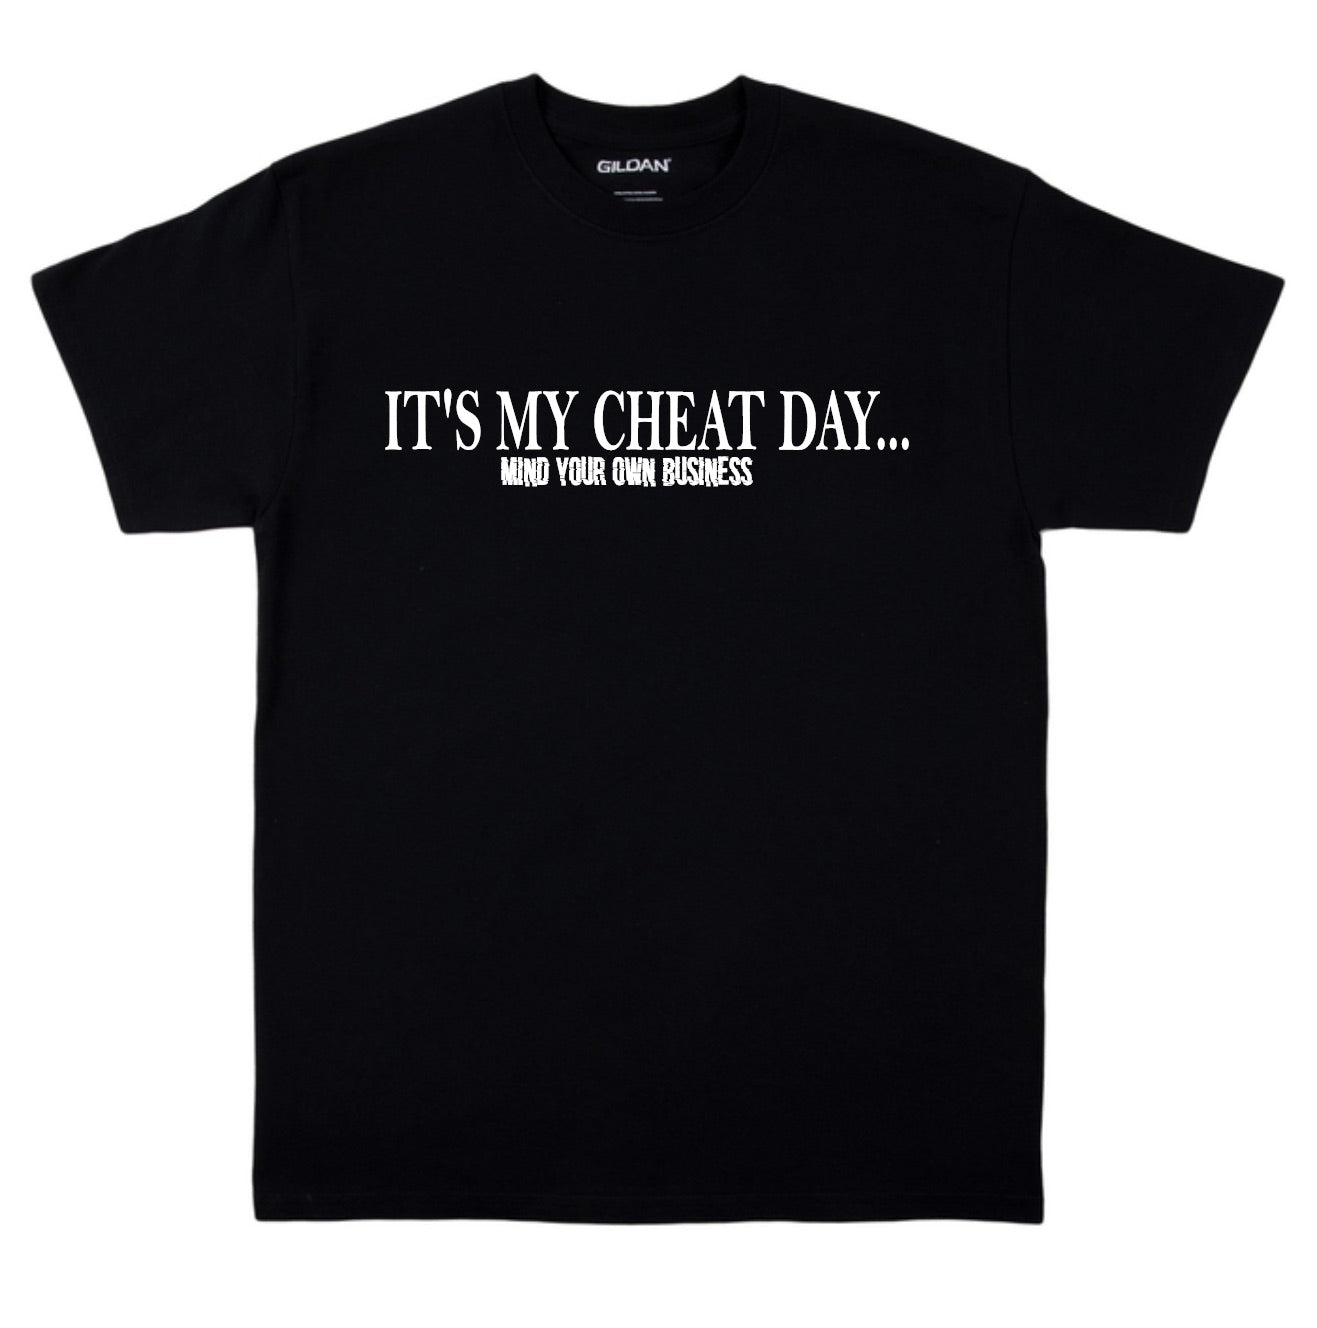 It's My Cheat Day Mind You Own Business Black T-Shirt